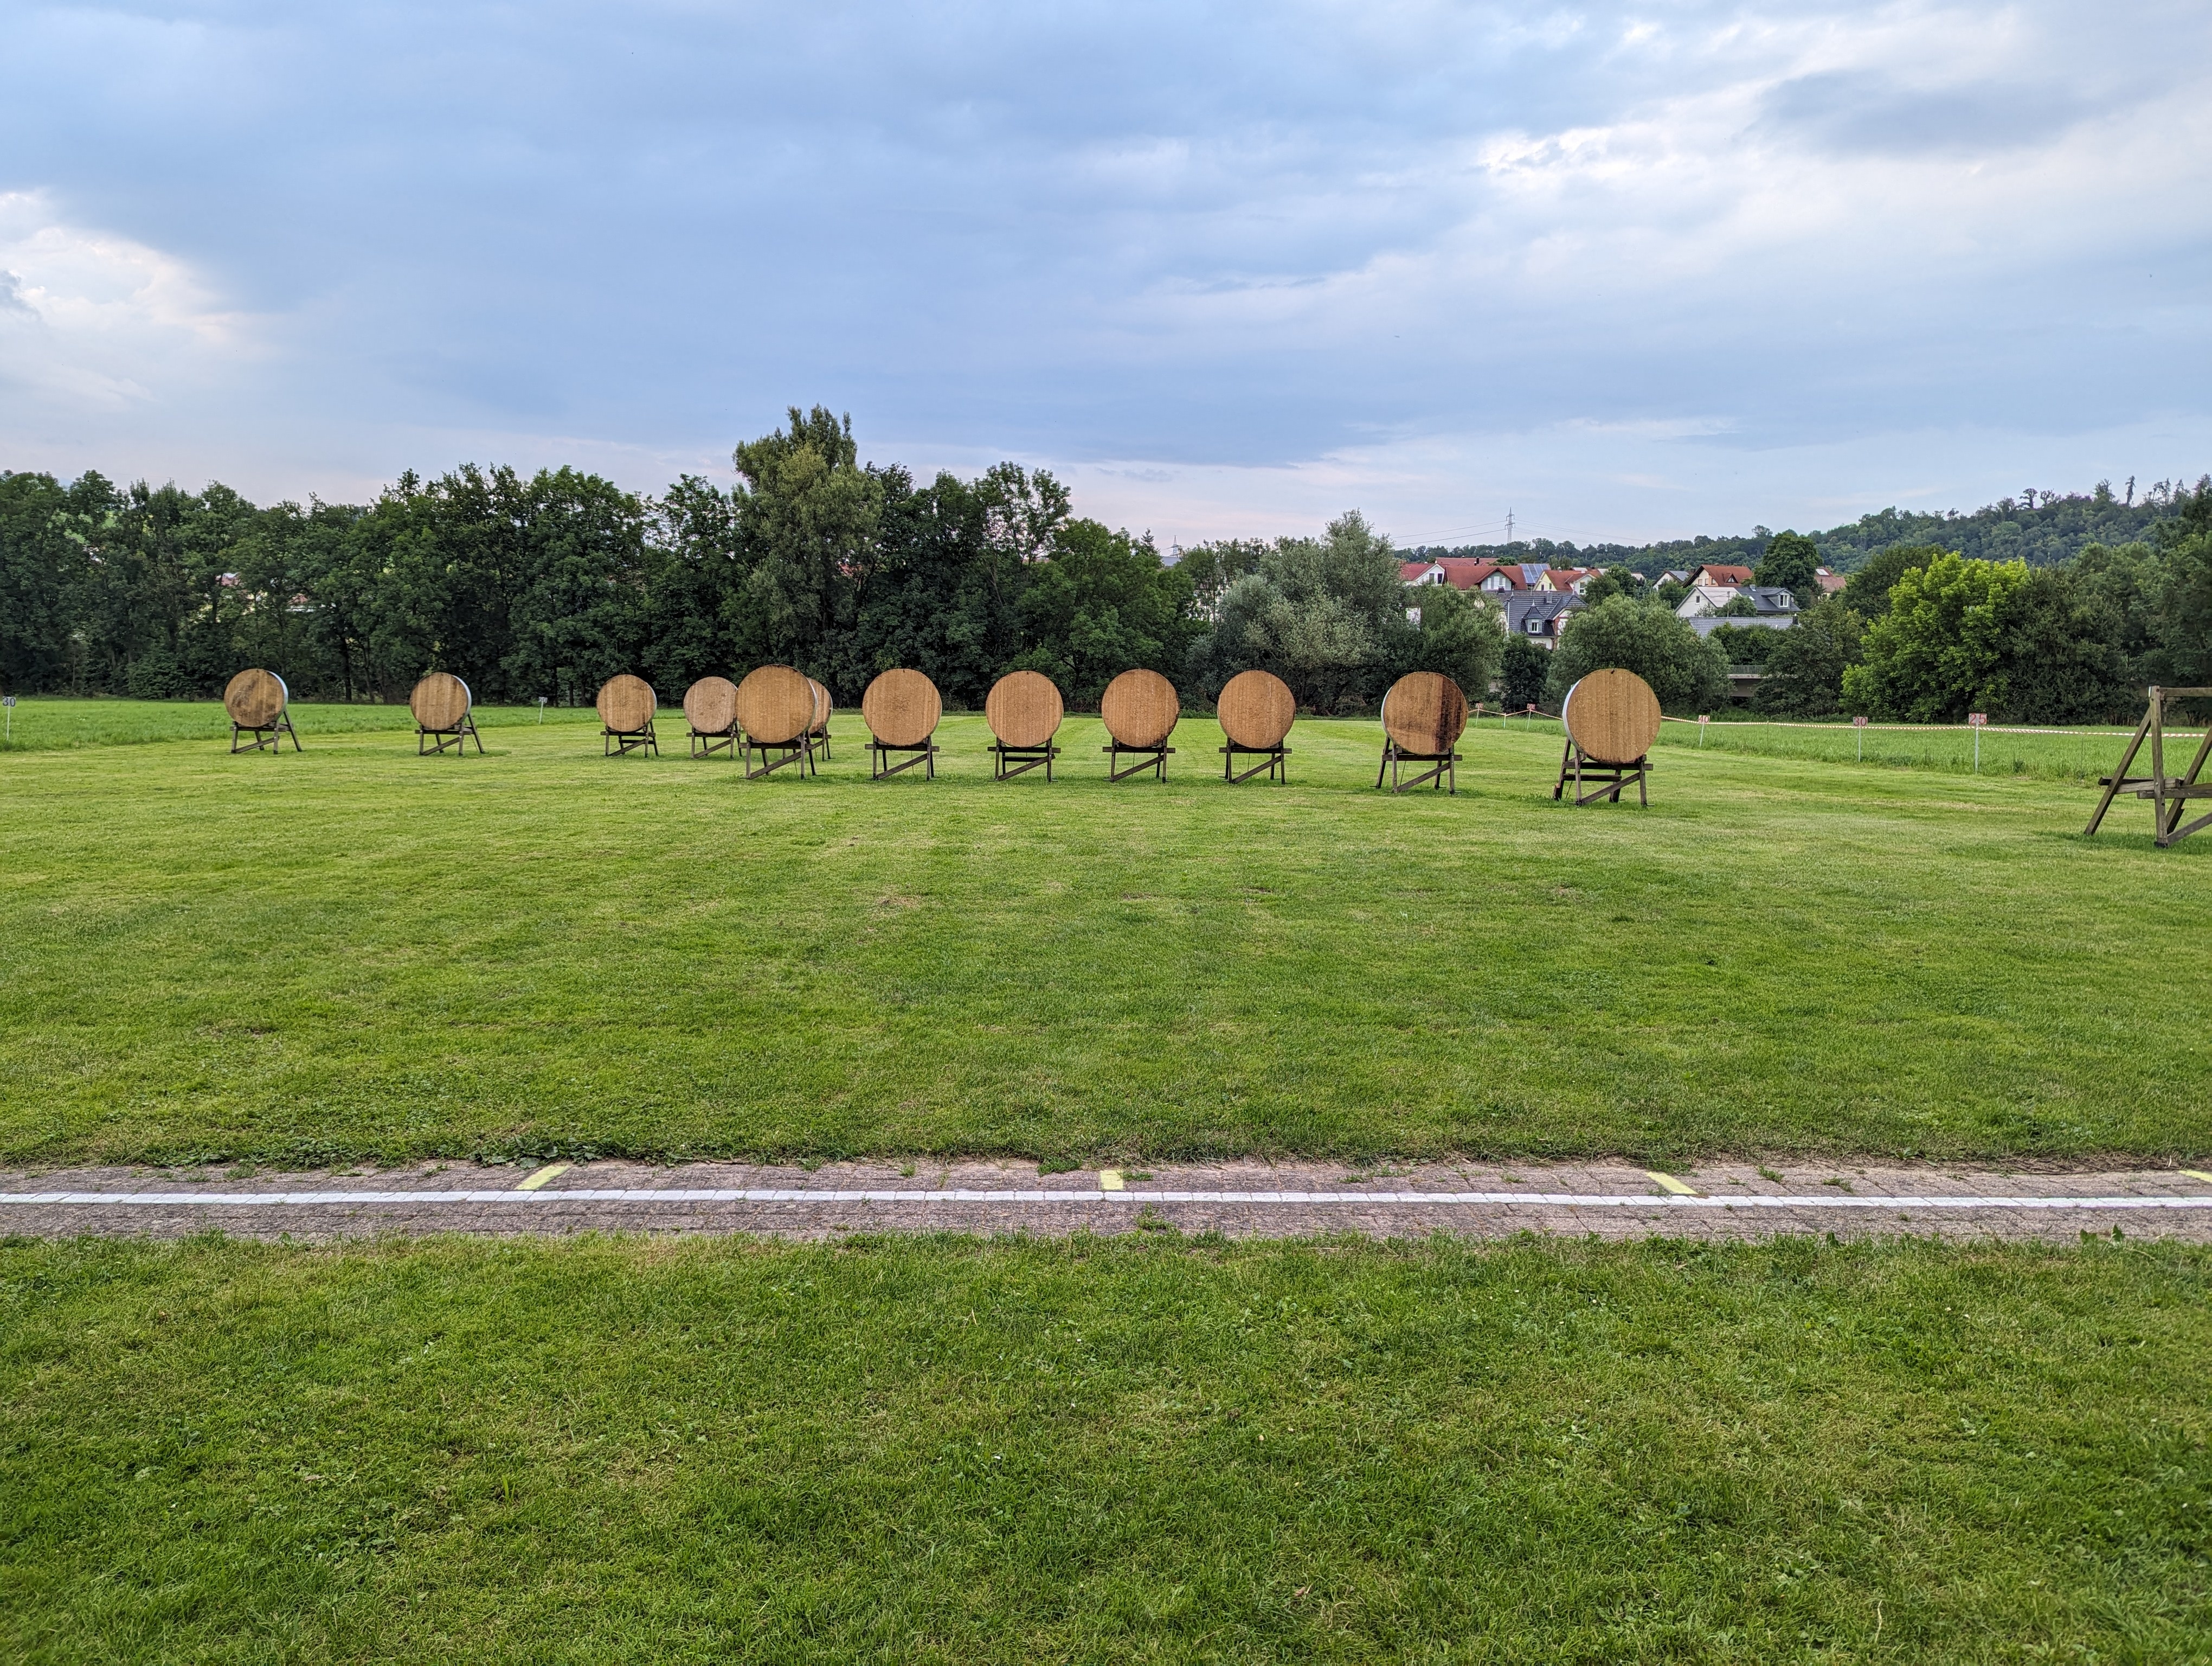 An archery range with no target faces